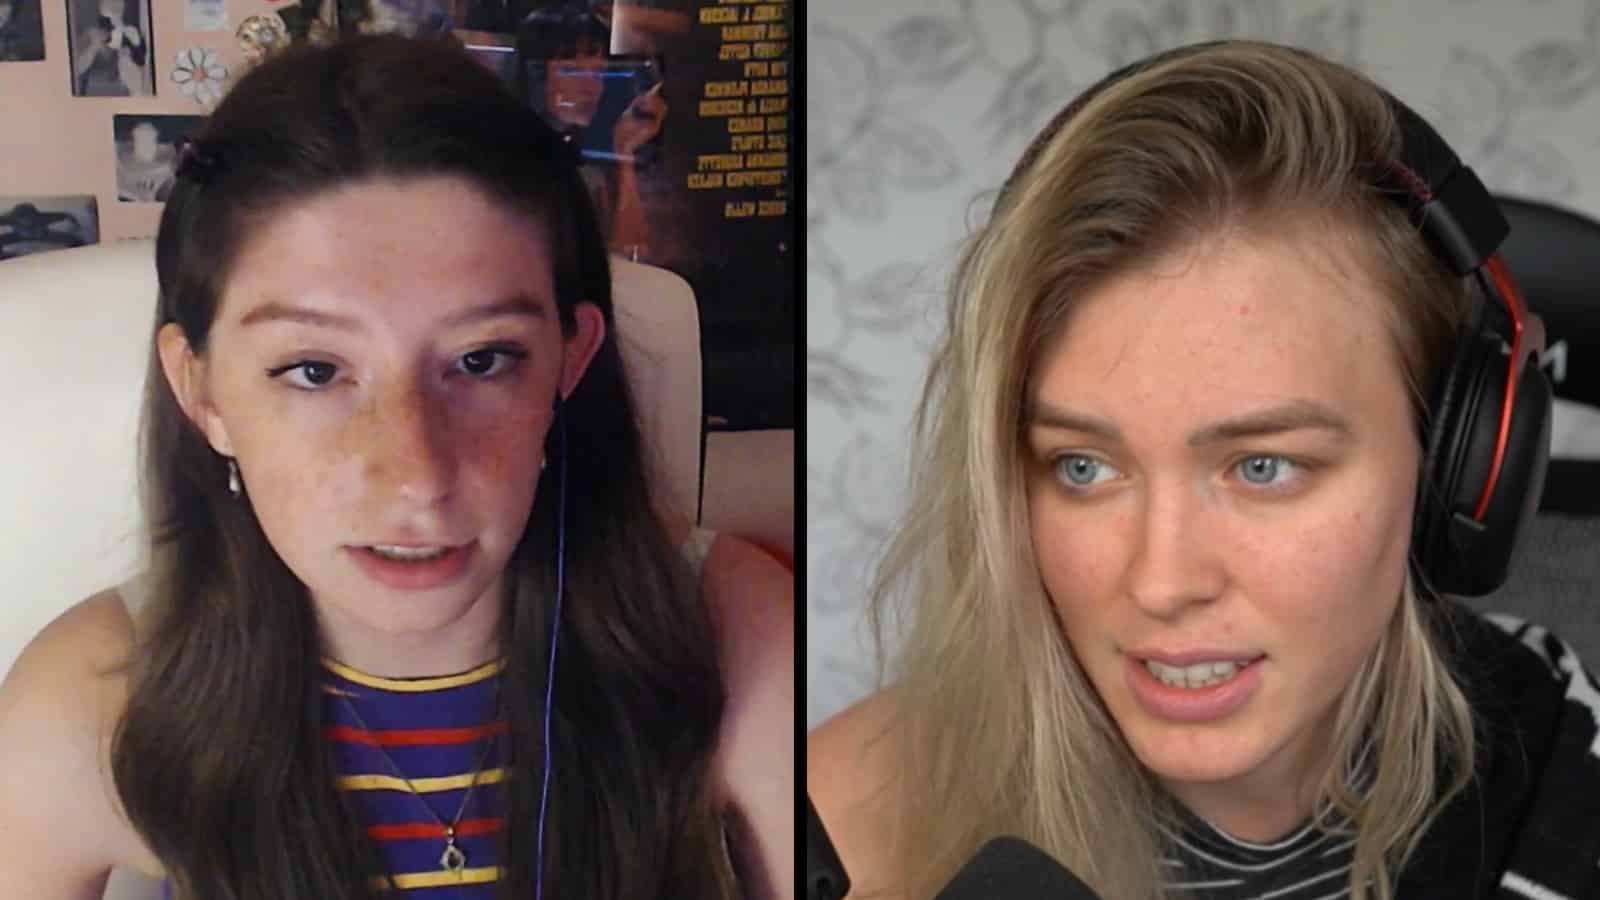 Twitch streamers QTCinderella & Babbsity get into heated argument